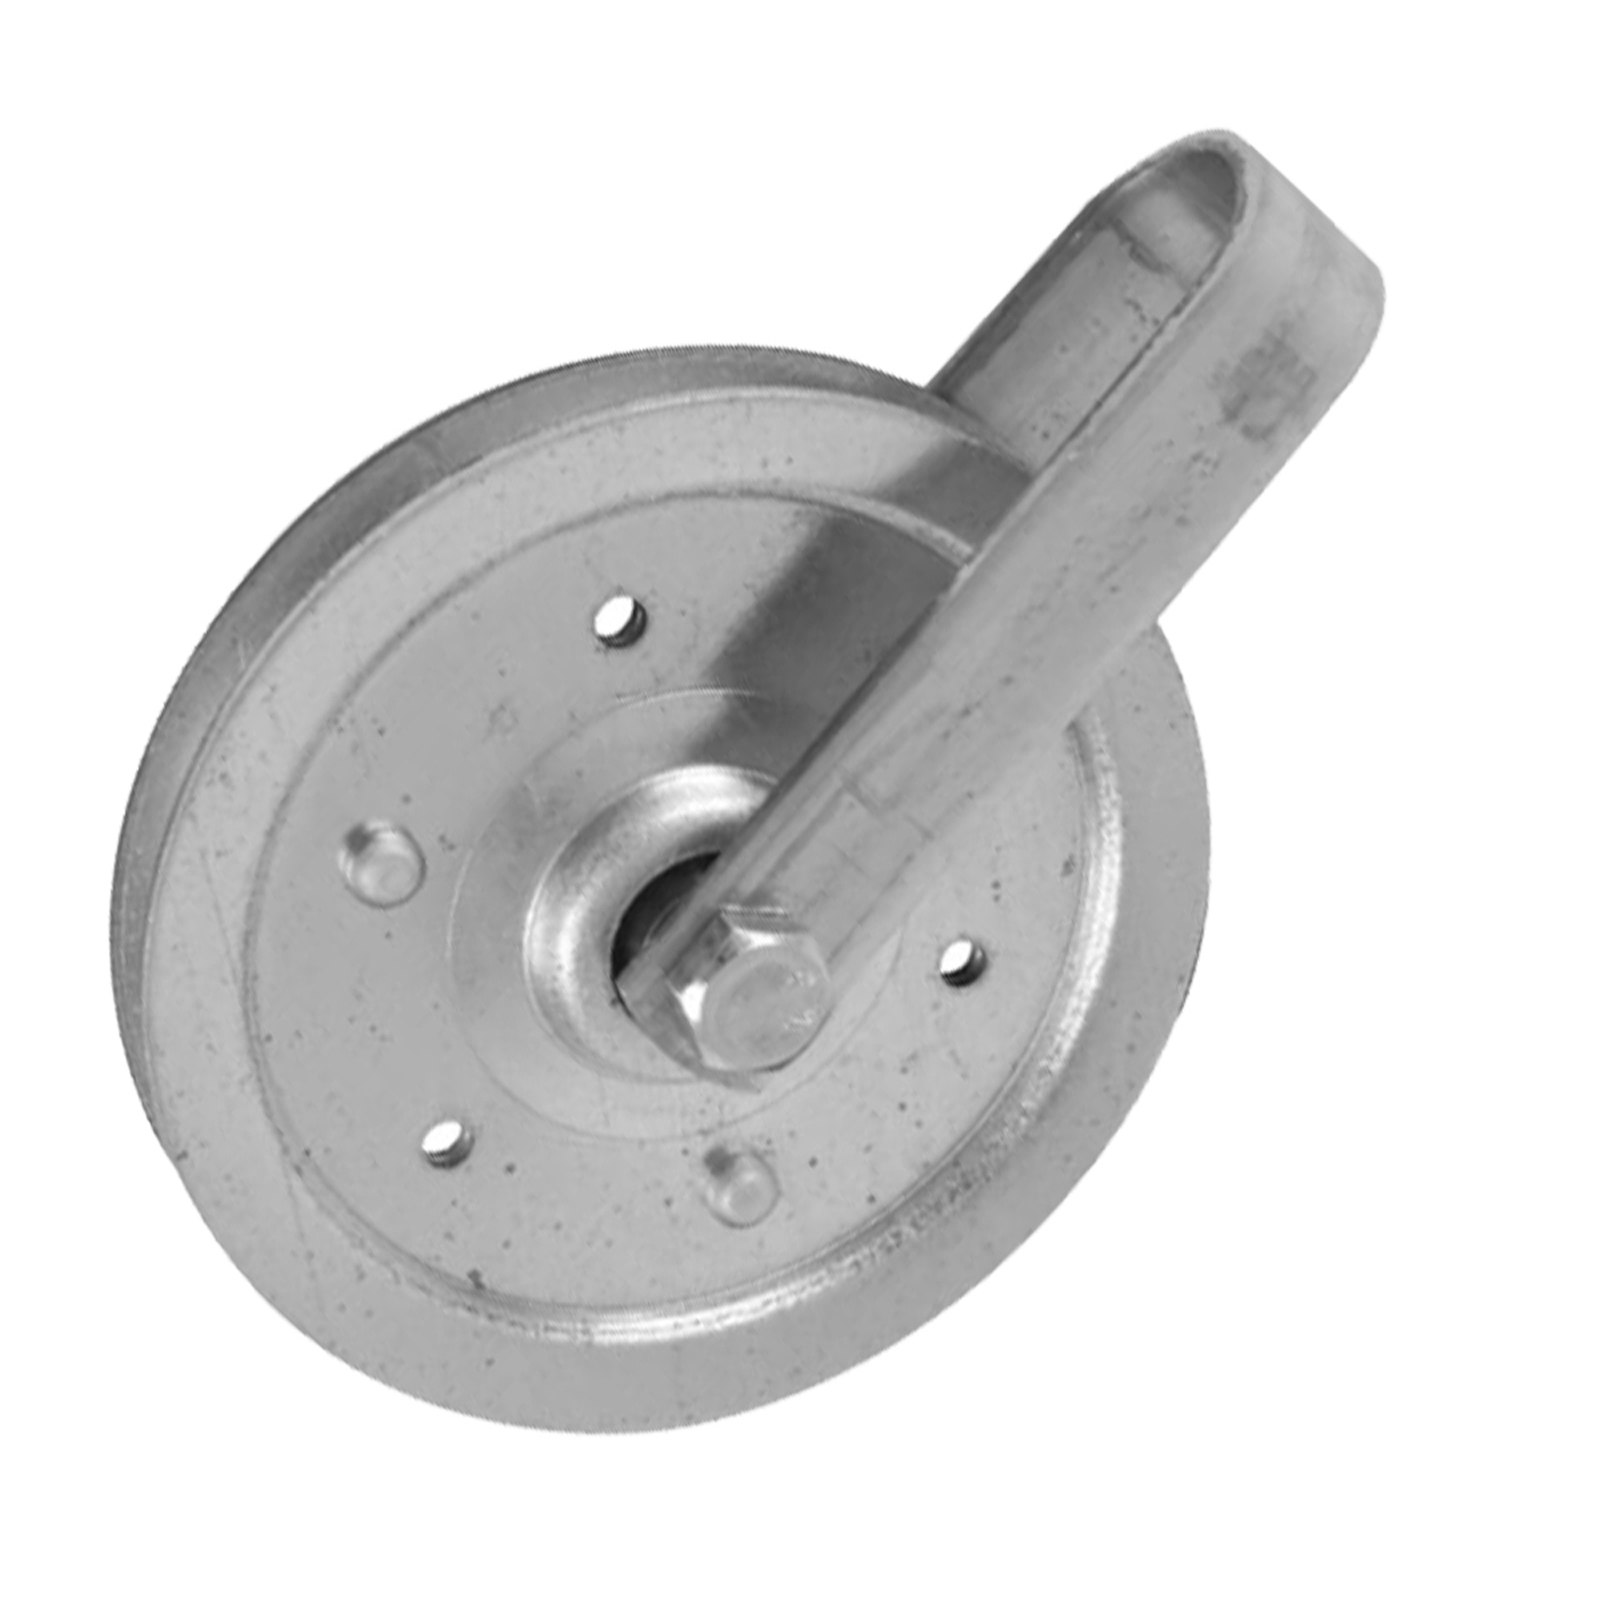 Ideal Security Inc. 4 in. Pulley with Fork and Bolt